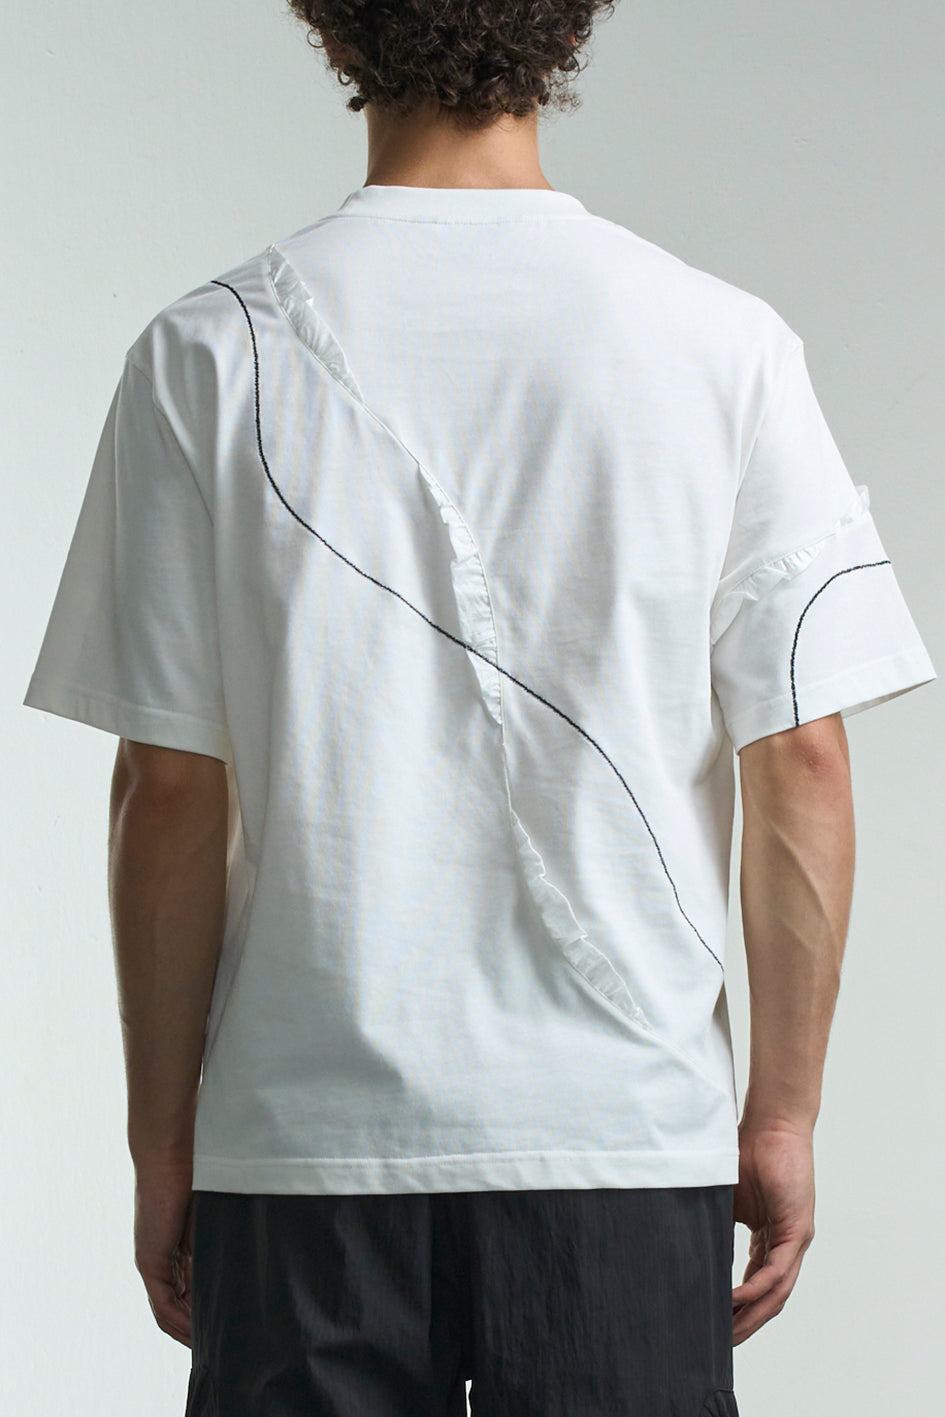 Tee With Curl Line Embroidery